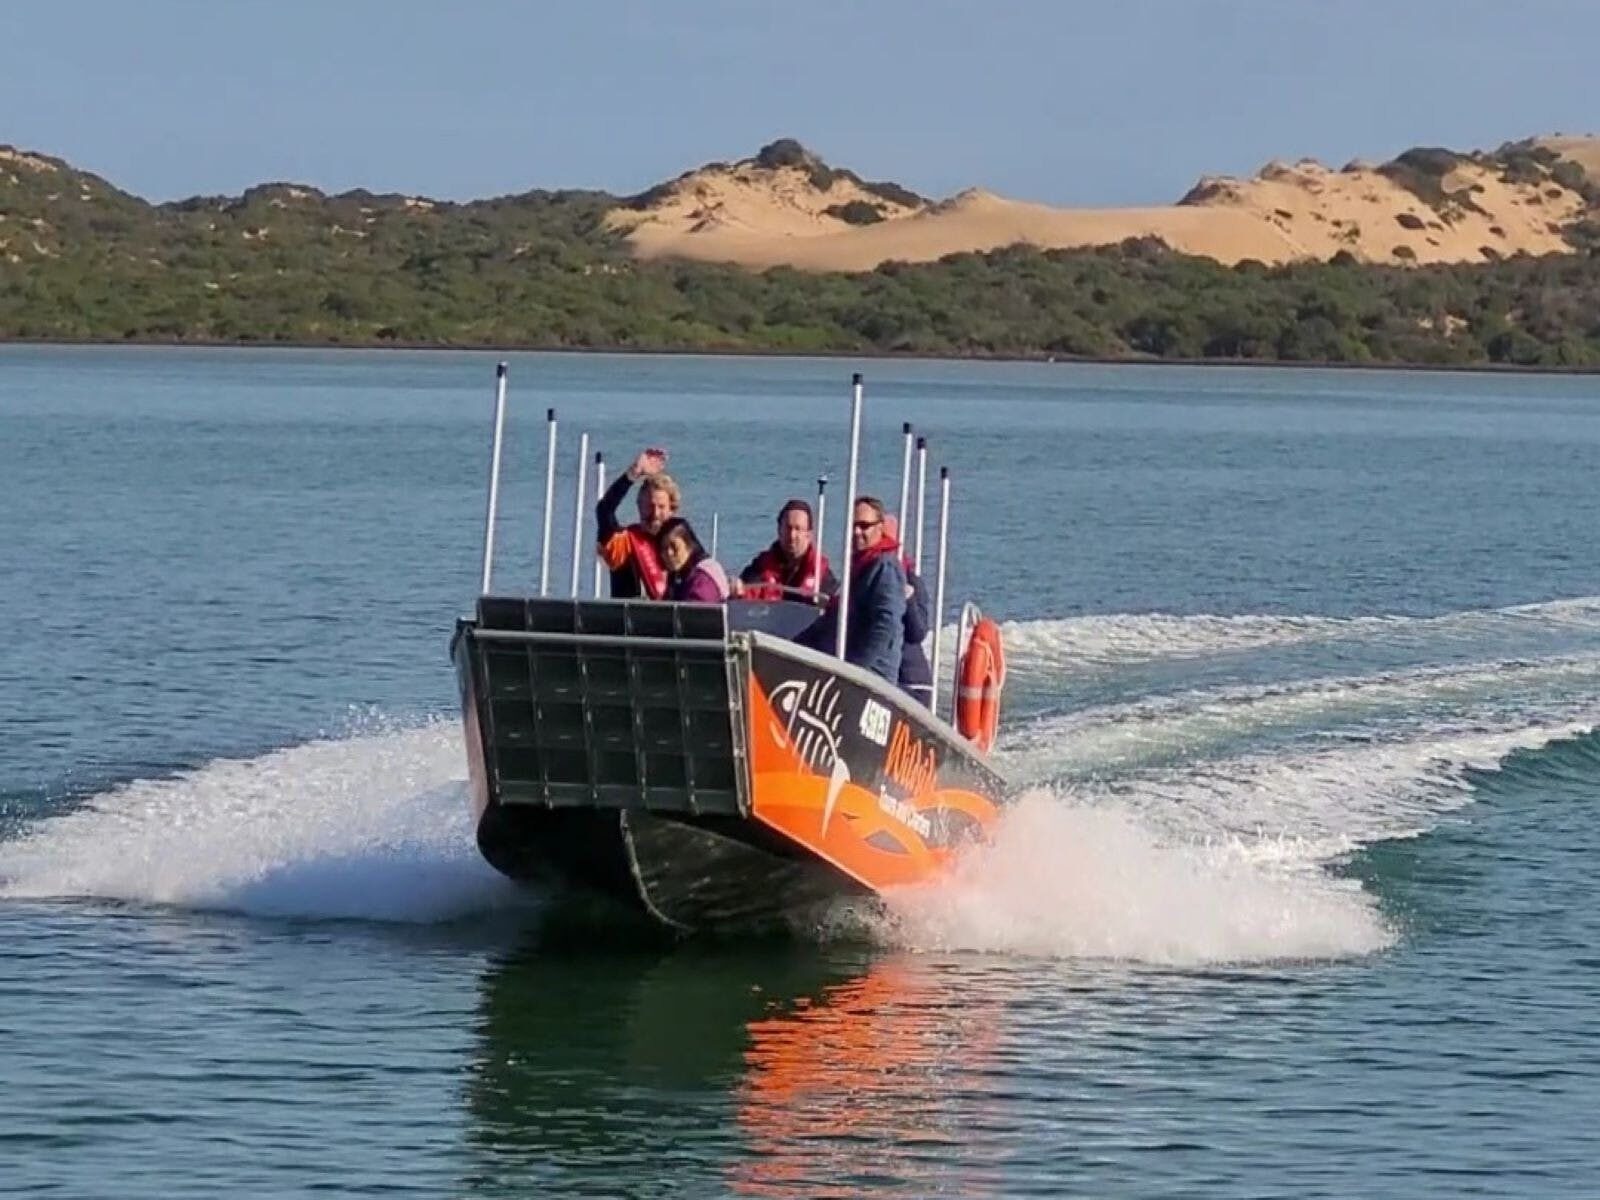 Coorong Wildside Tour boat in action on the Coorong